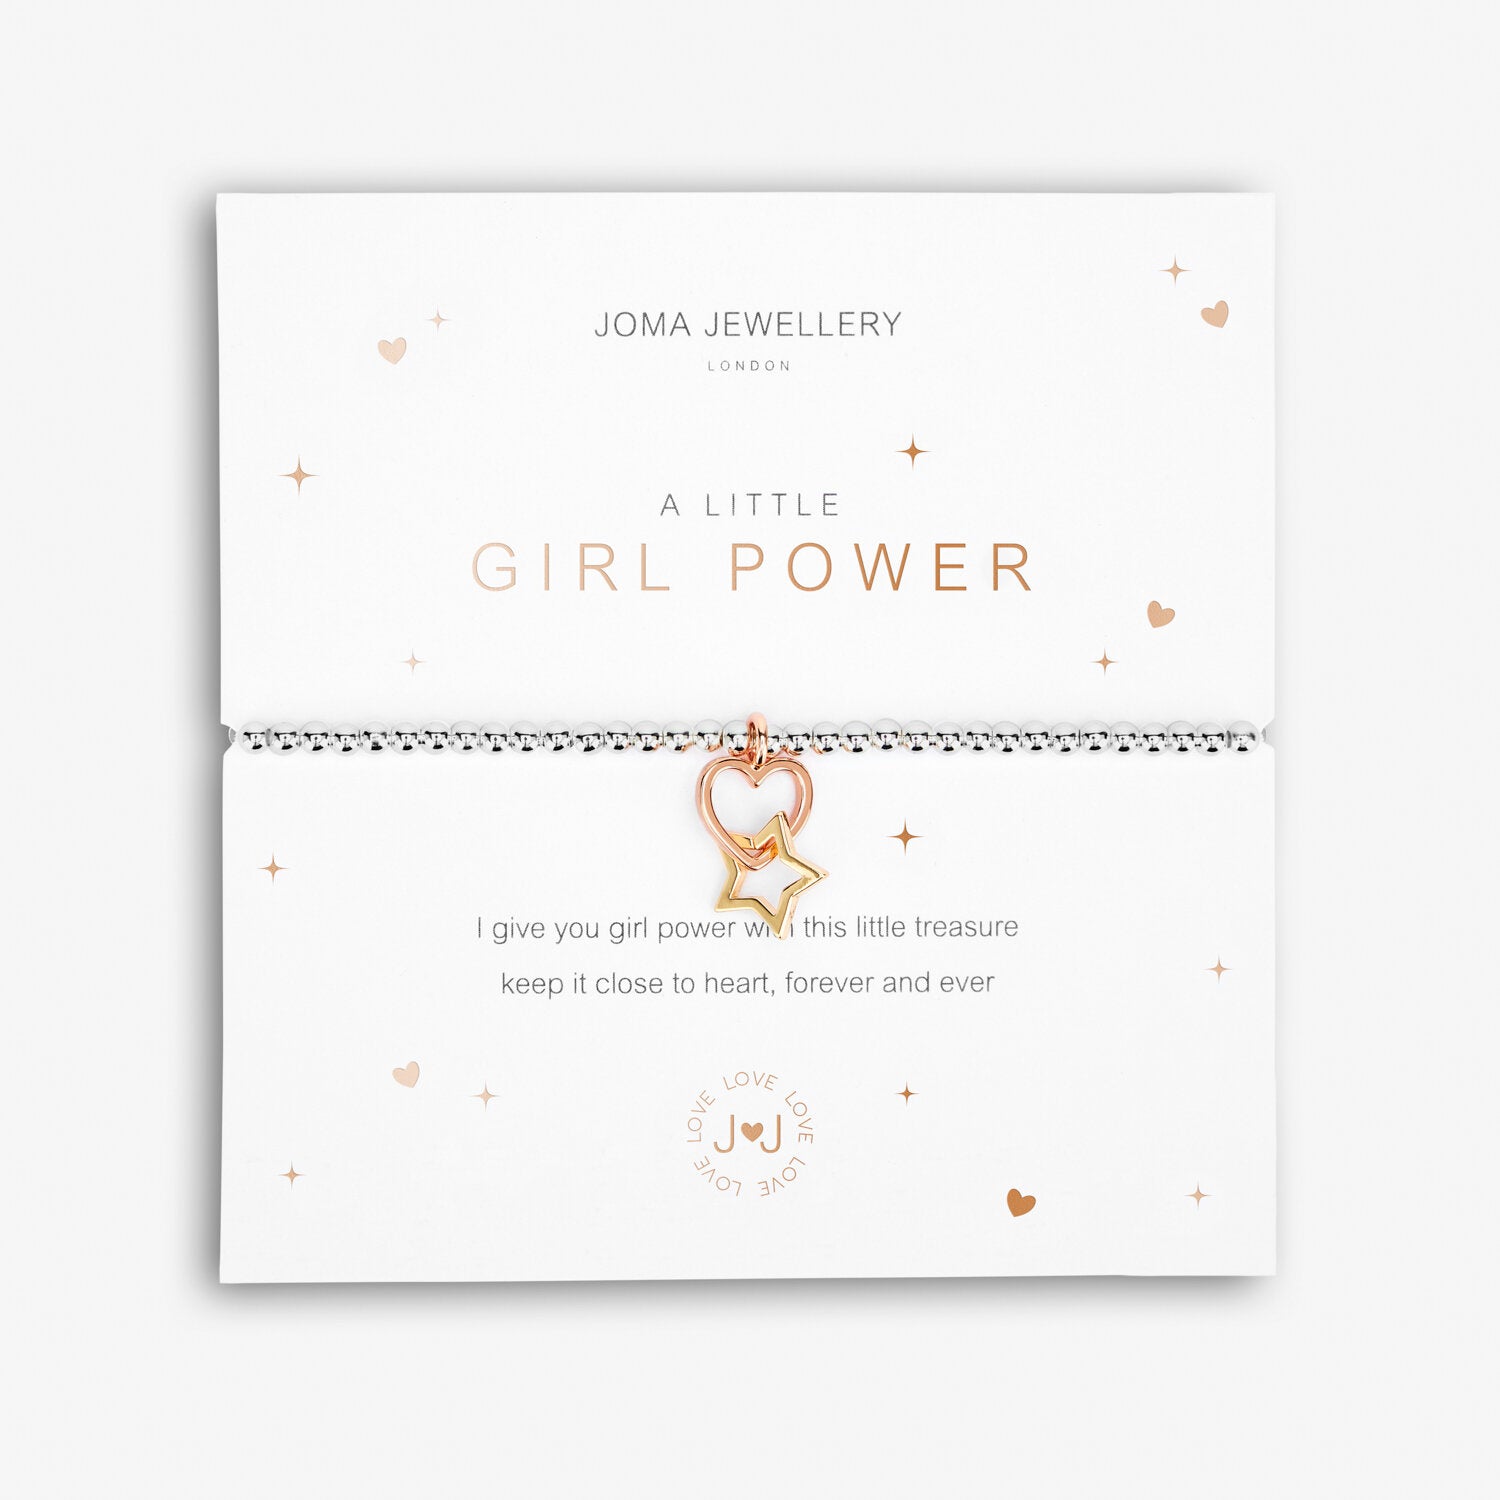 Joma Jewellery A Little 'Girl Power' Bracelet | More Than Just A Gift